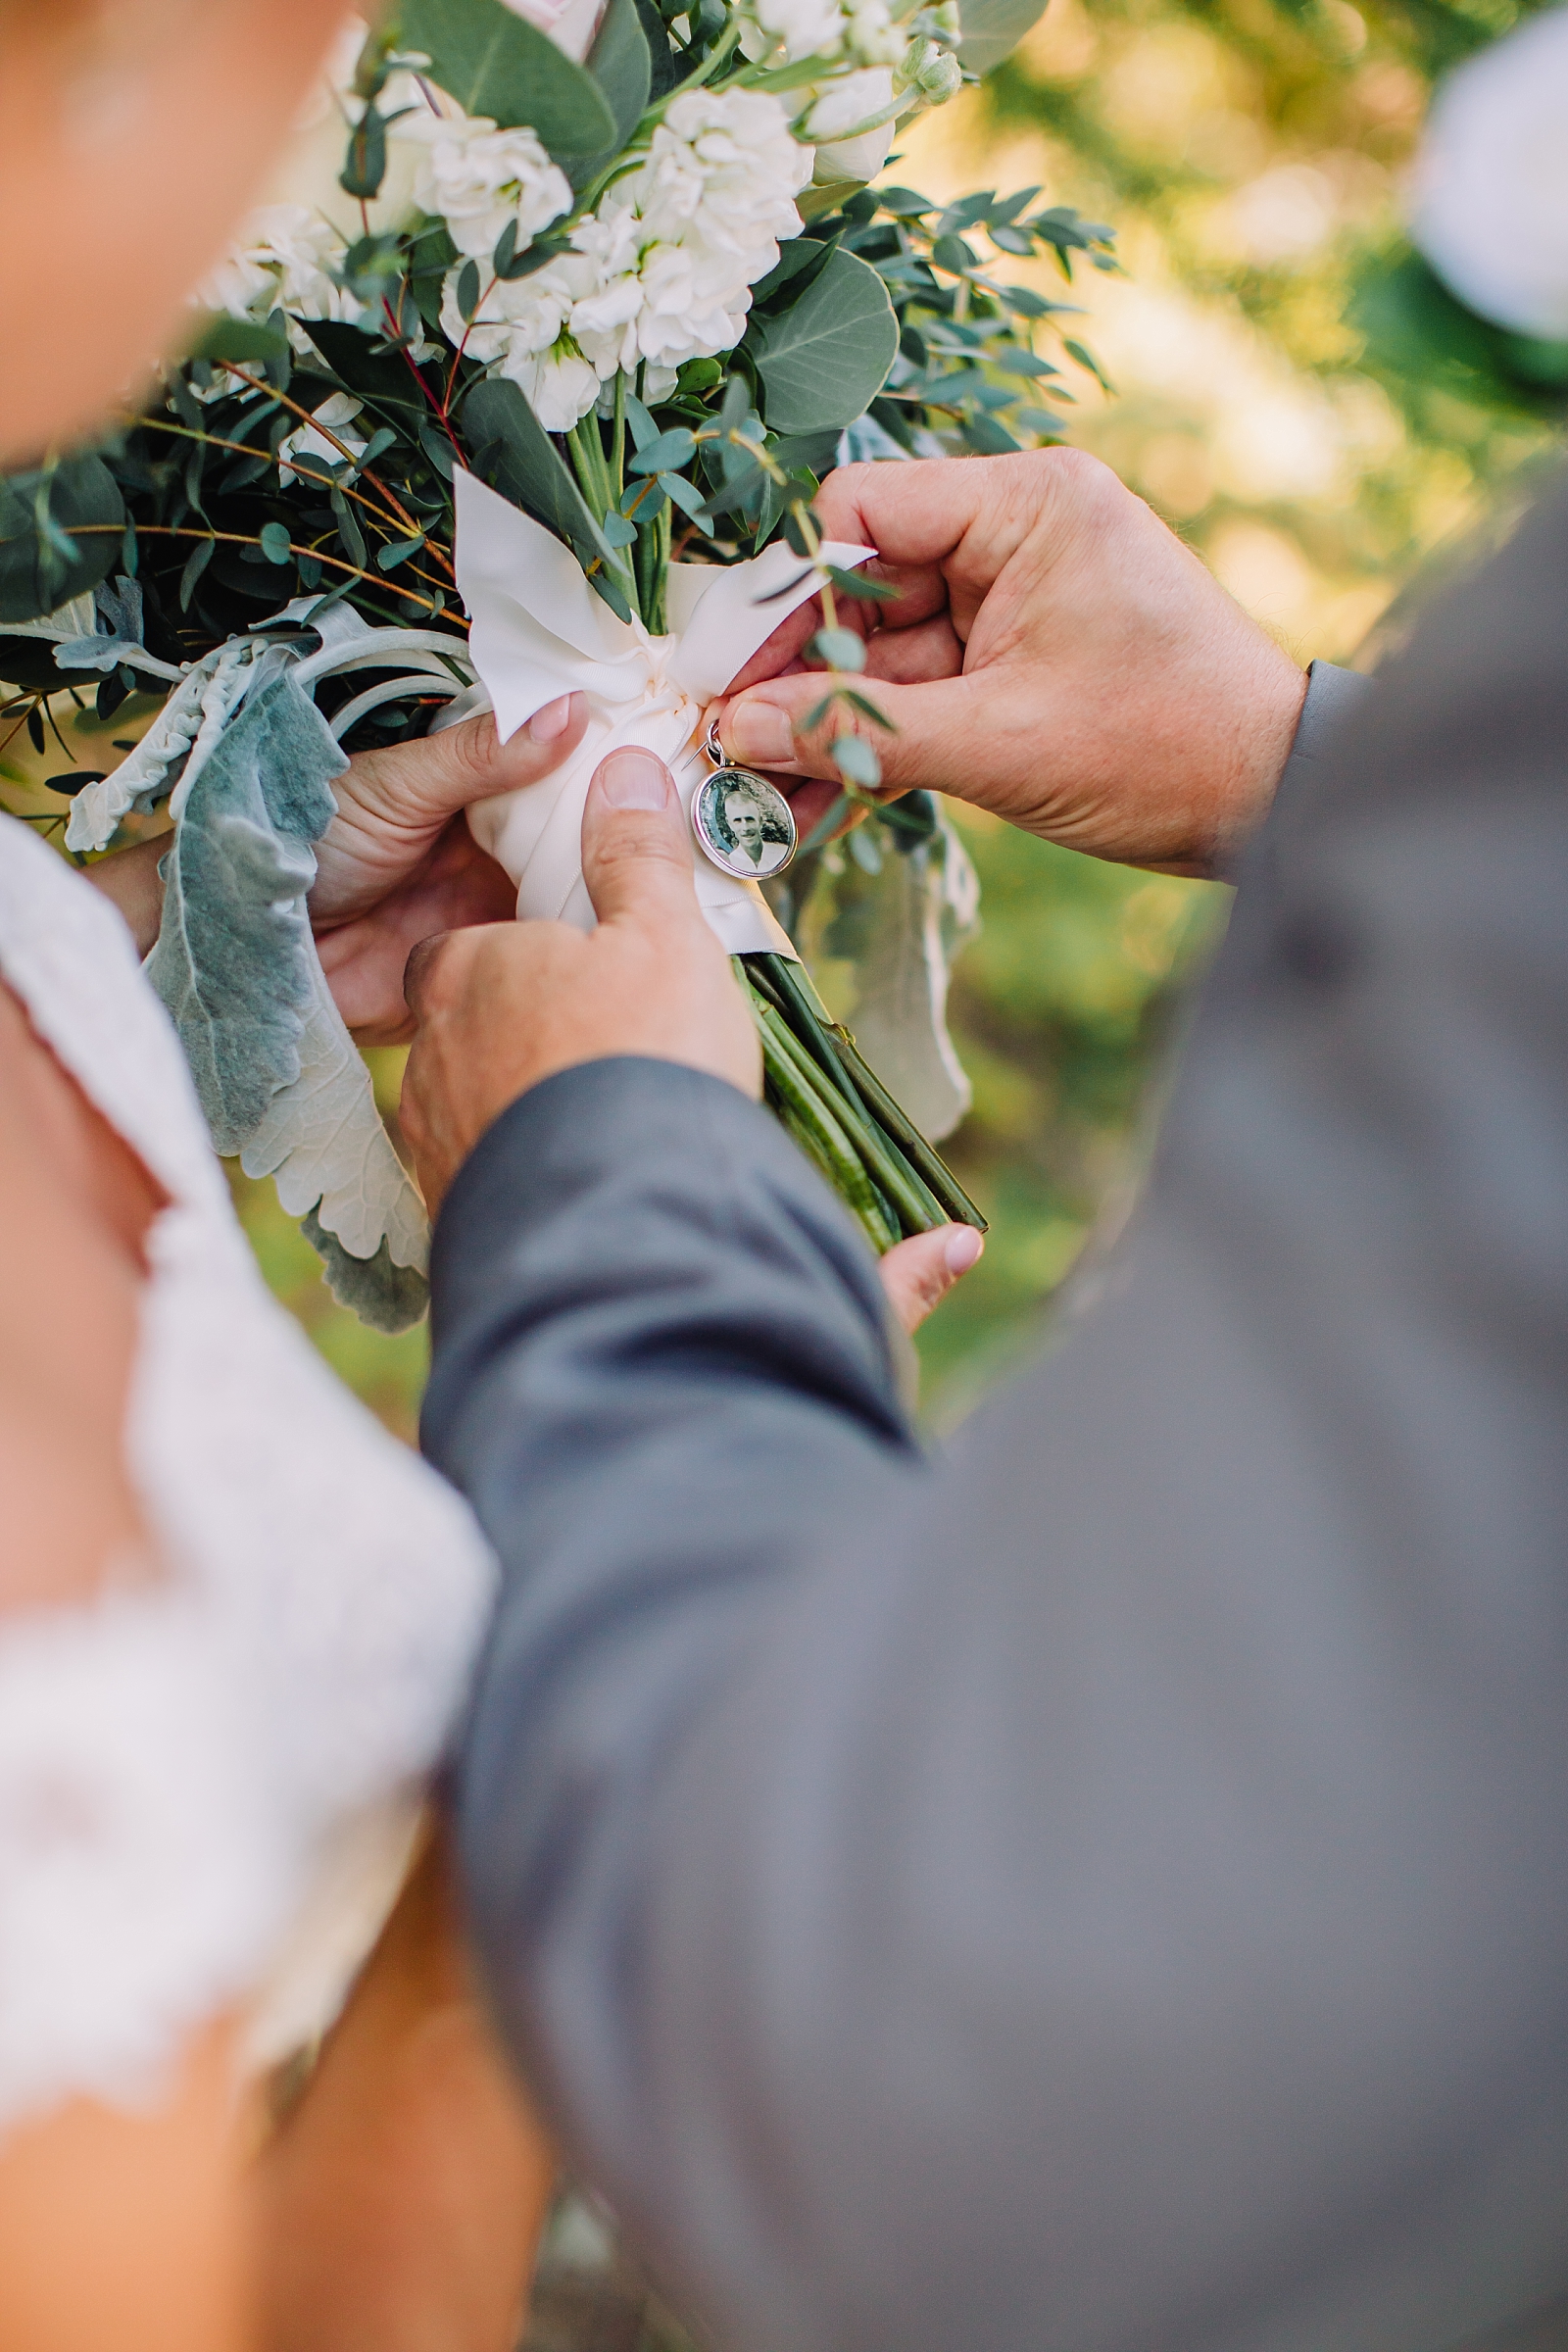 honoring loved ones at your wedding using wedding tradition